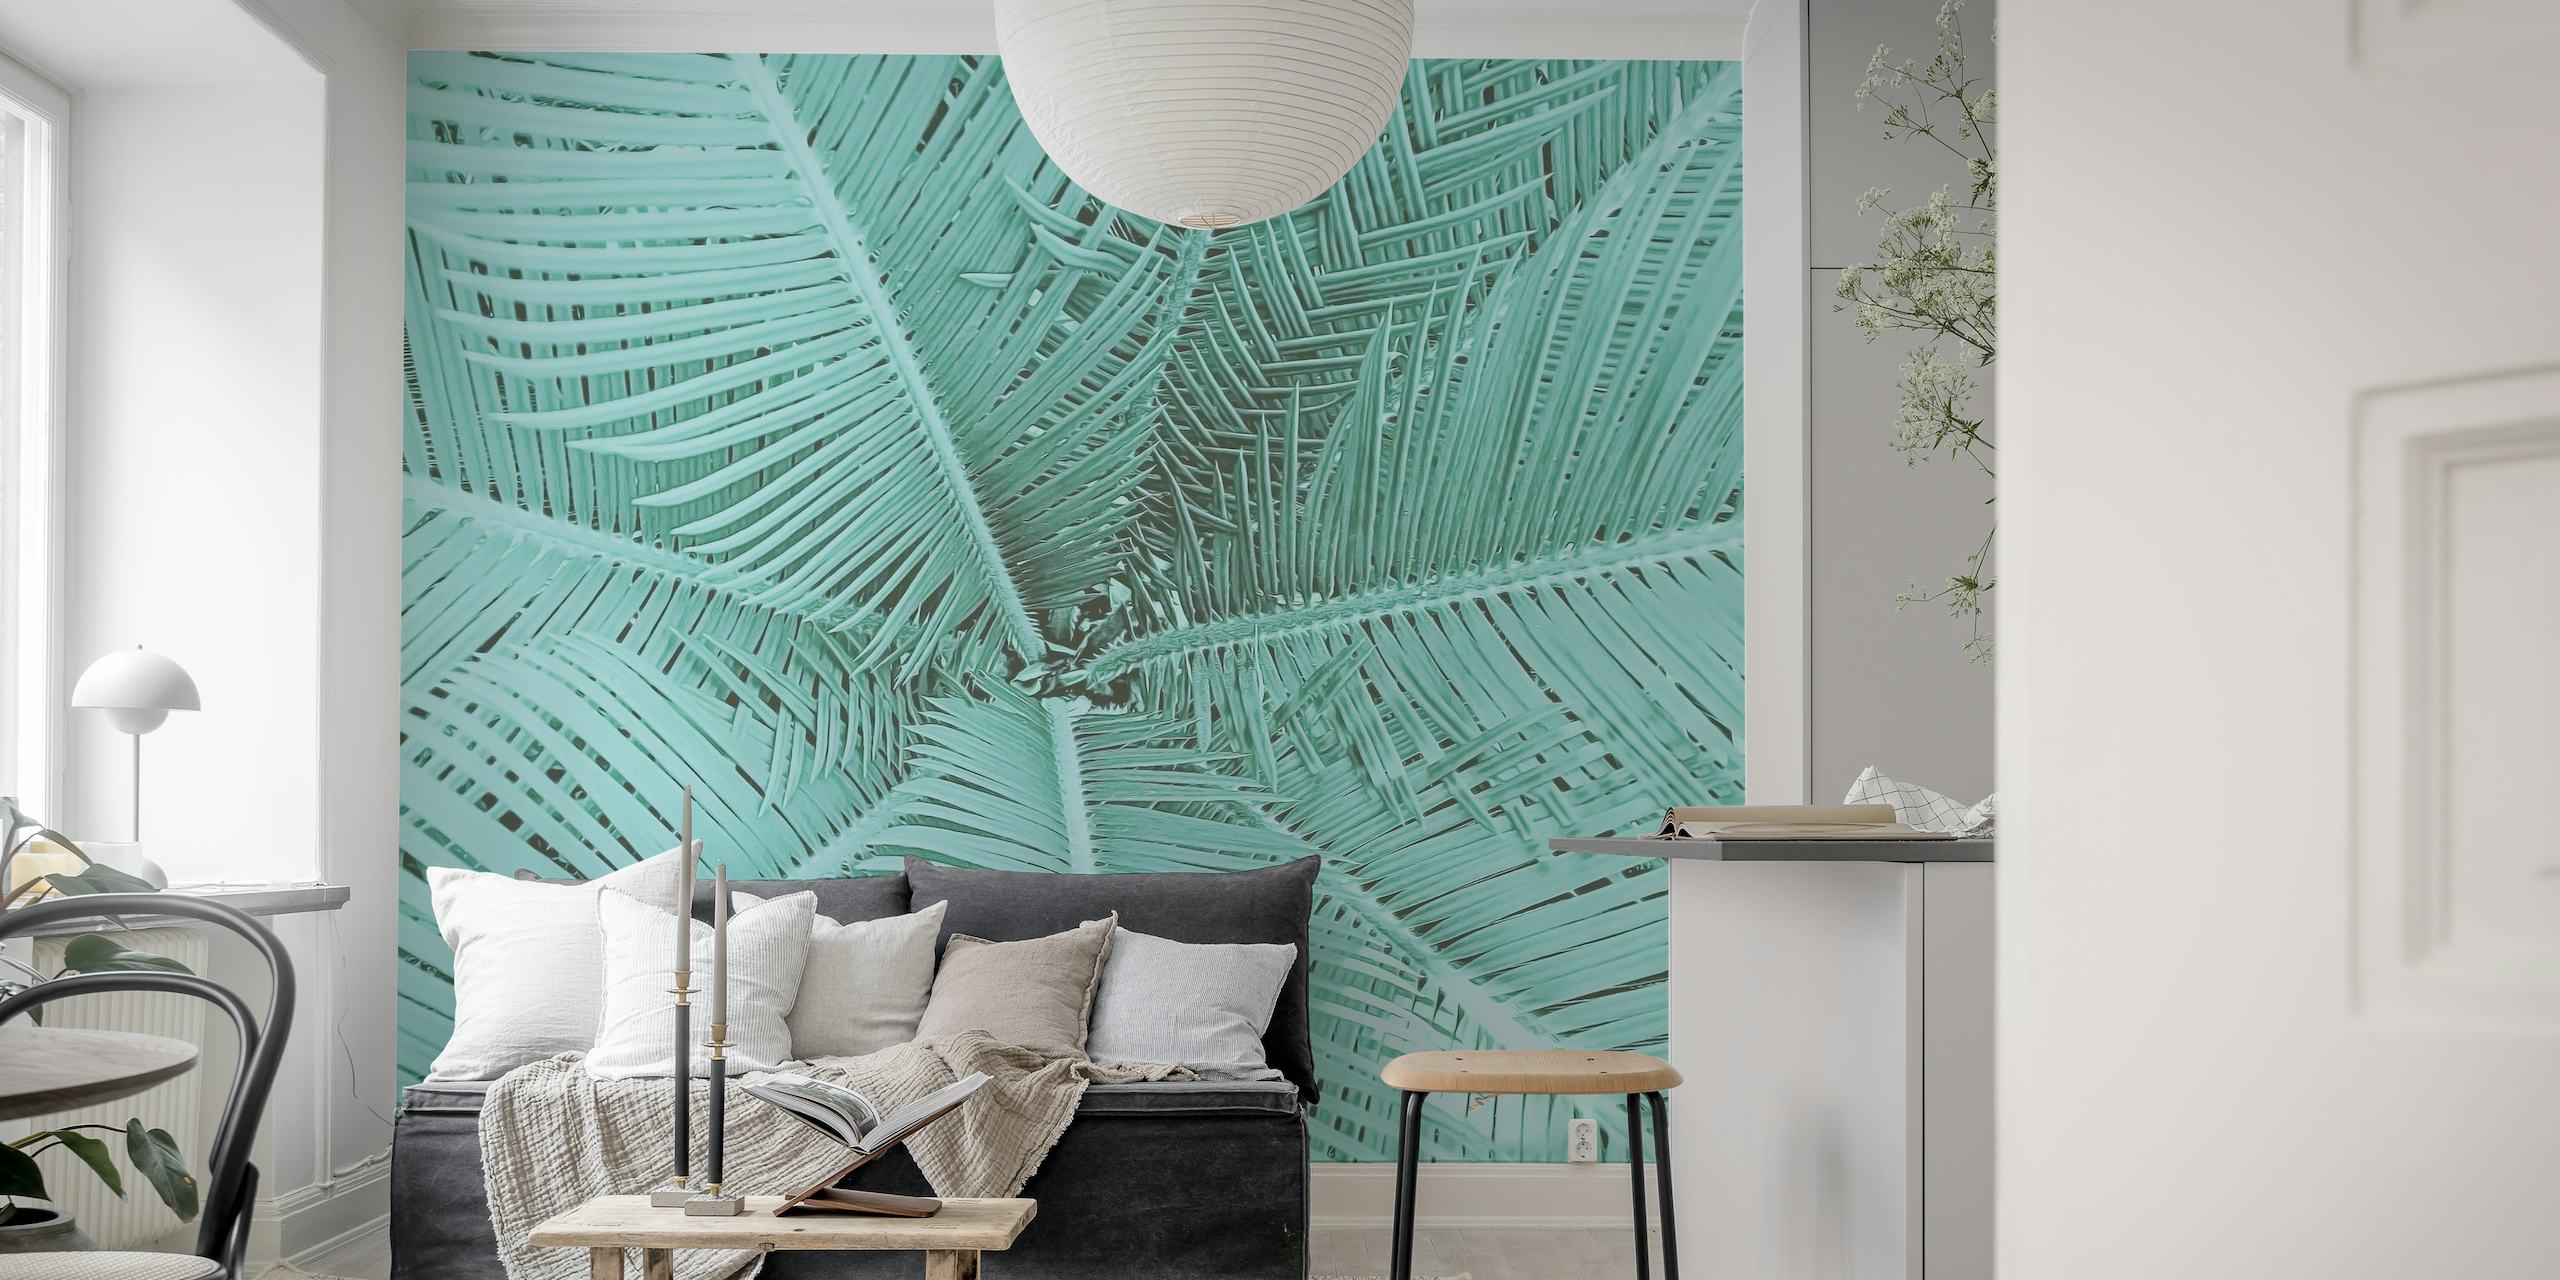 Teal Palm Leaves wall mural with an overlay of tropical foliage